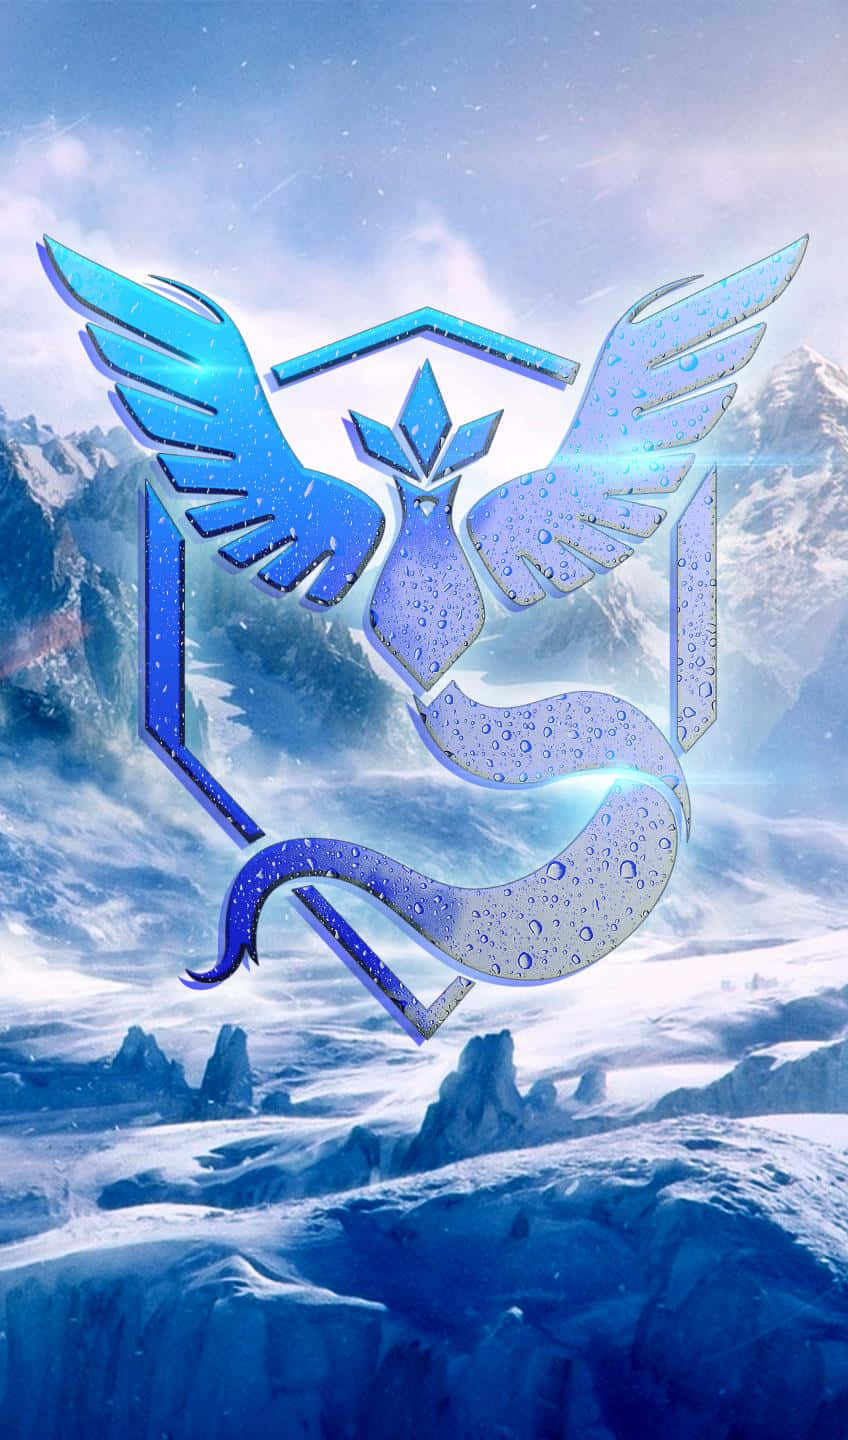 Be A Trainer, Lead With The Power Of Team Mystic